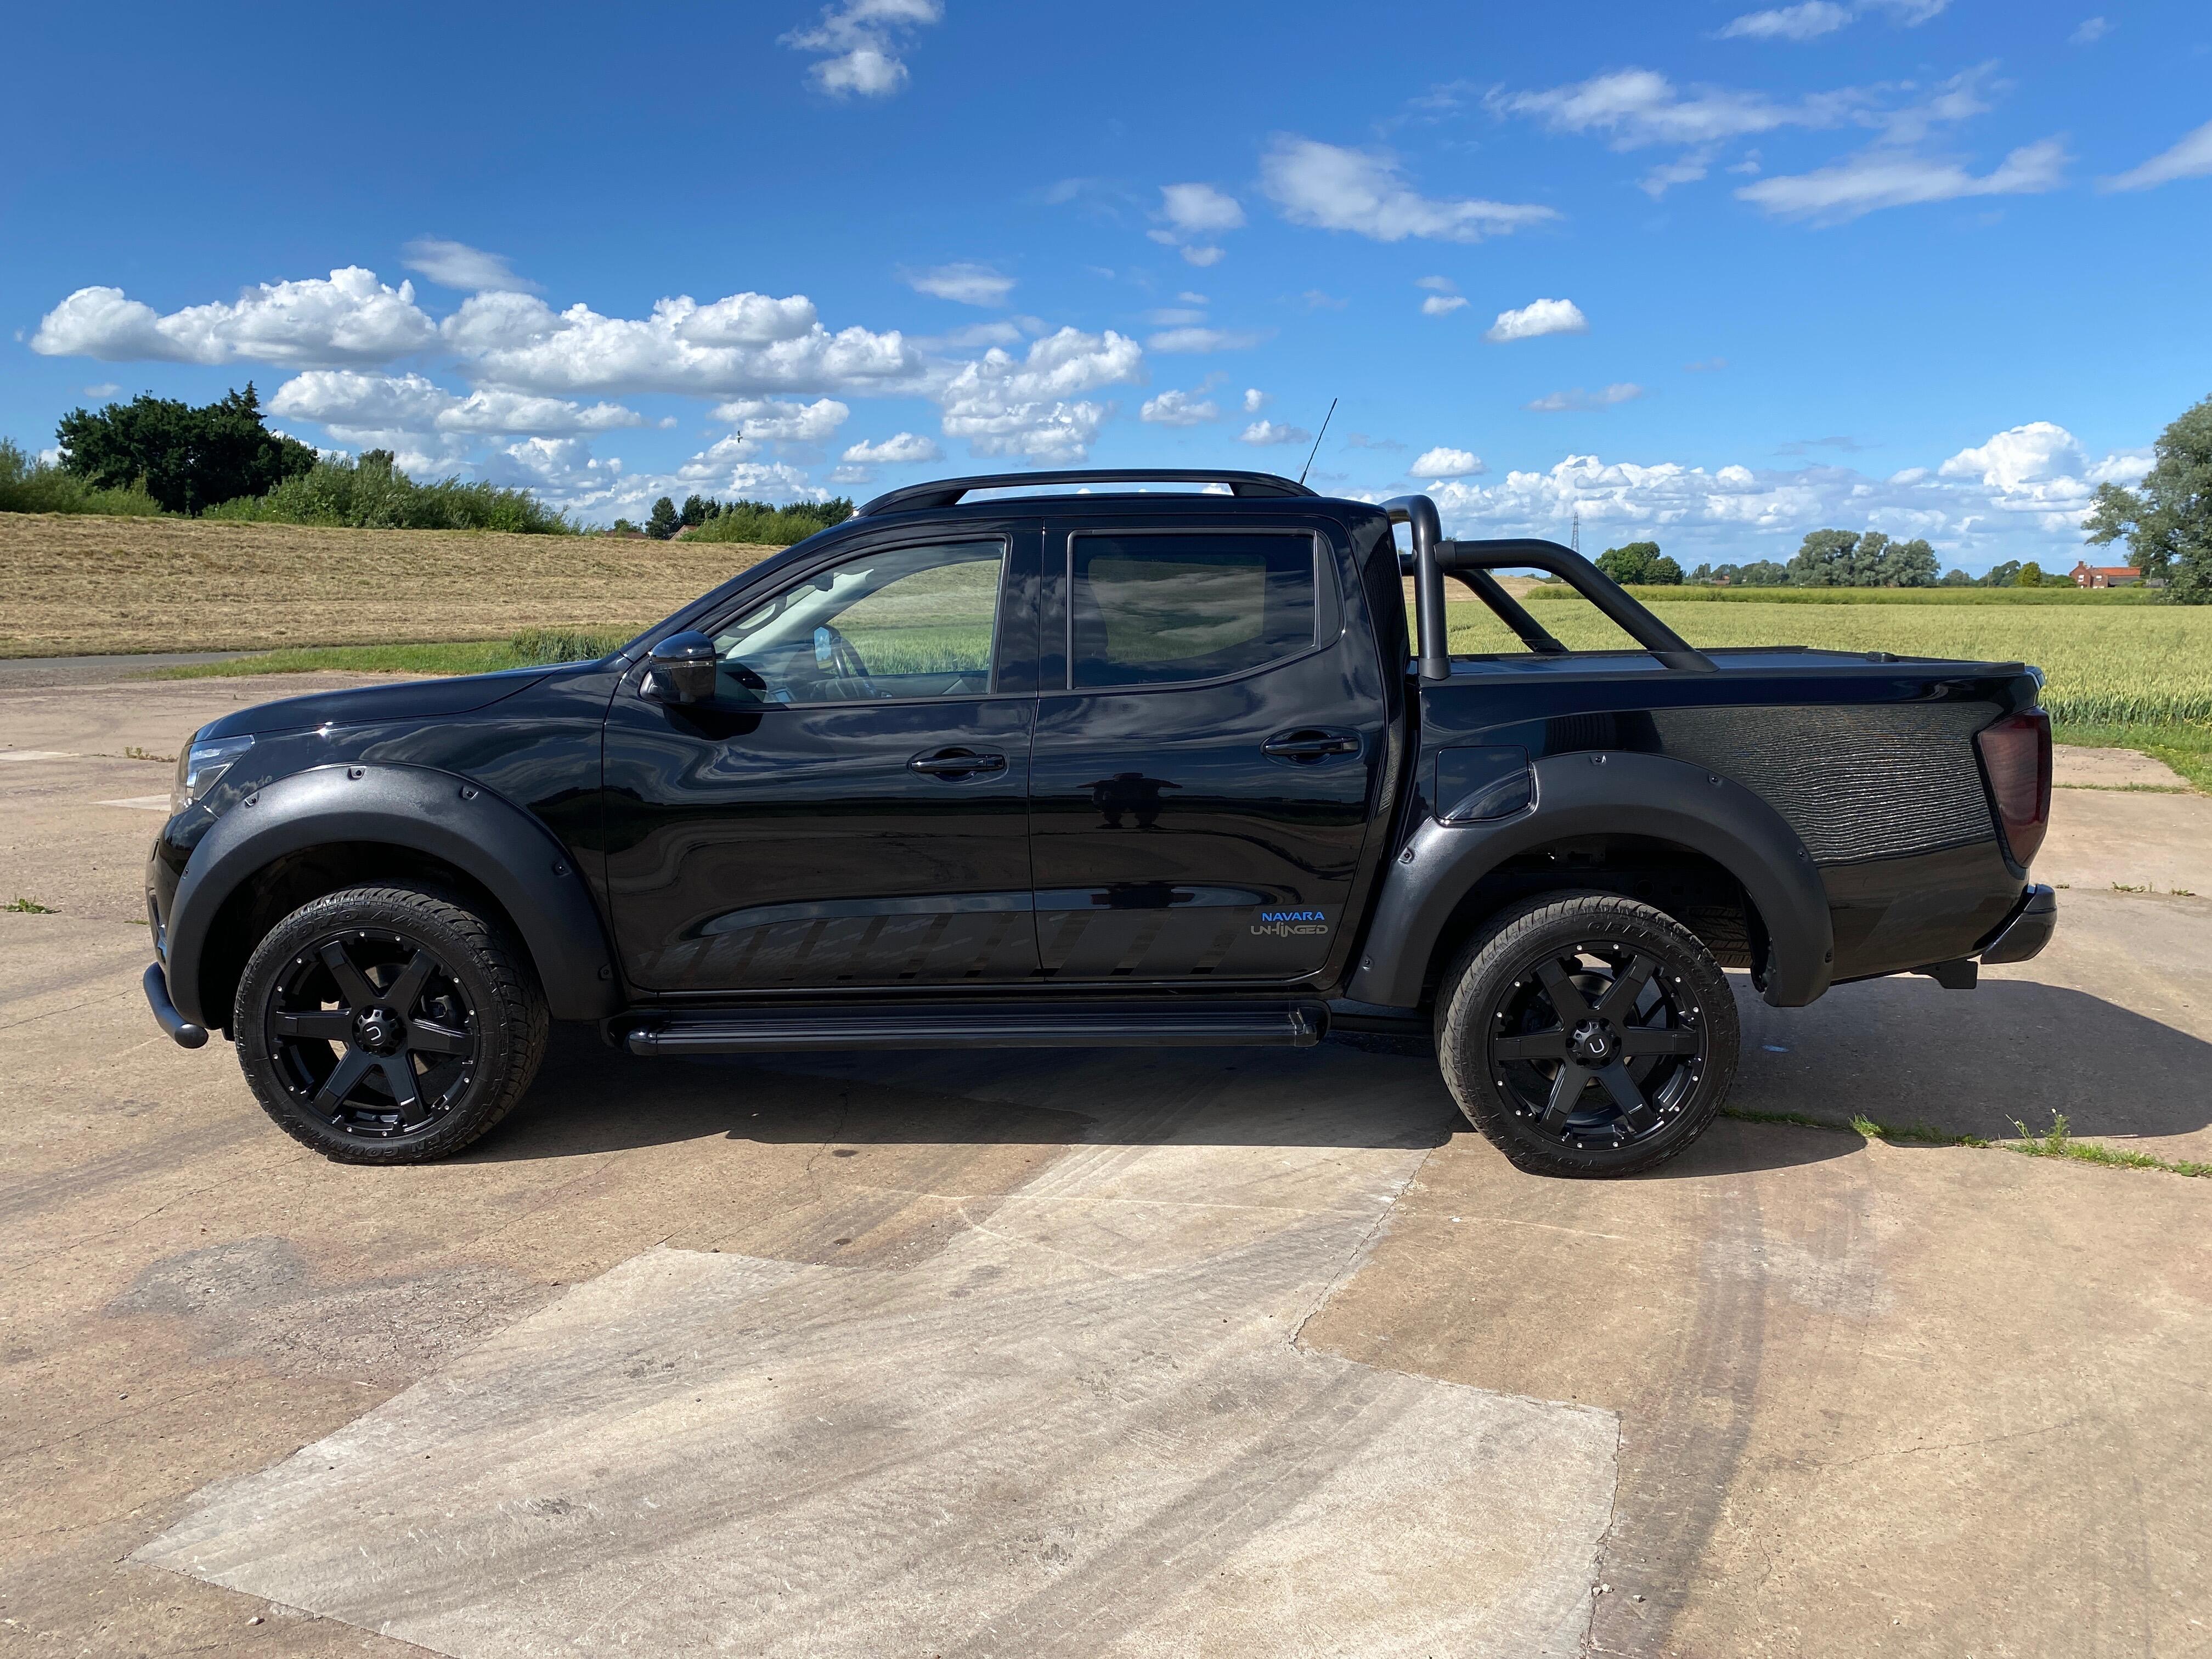 2021 - UNHINGED Limited Nissan Navara Double Cab Pickup - Wide Trax